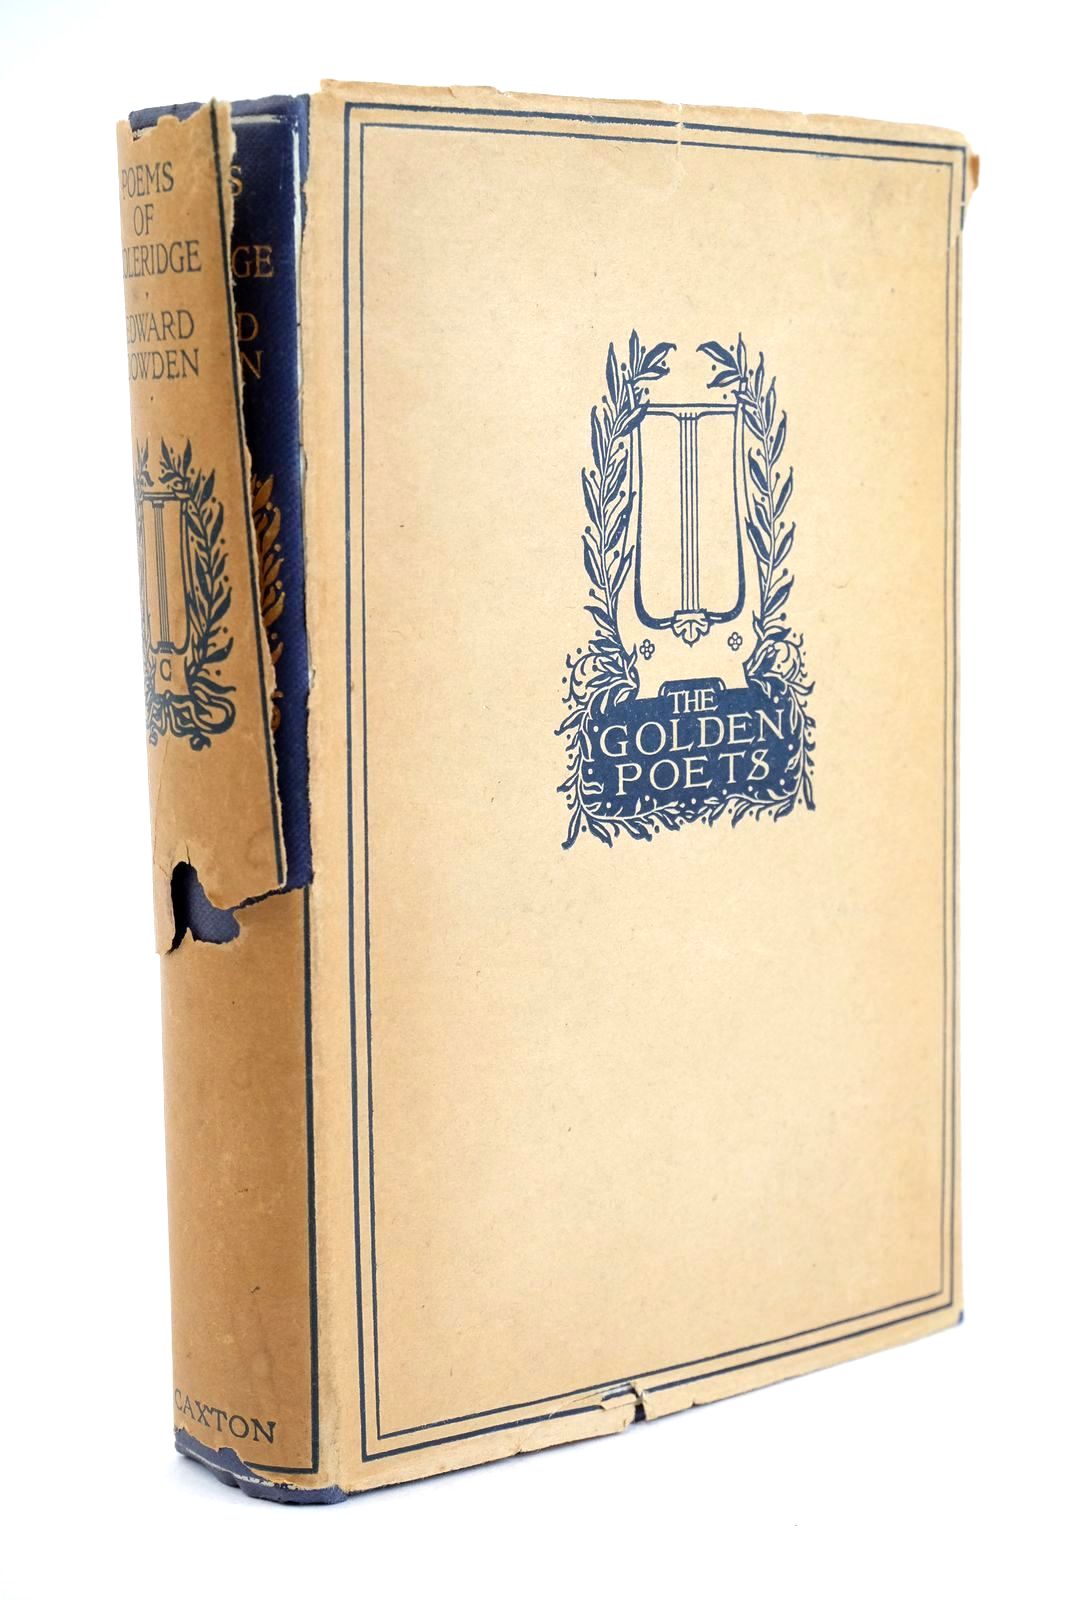 Photo of POEMS OF COLERIDGE written by Coleridge, Samuel Taylor Dowden, Edward illustrated by Pears, Chas. et al., published by Caxton Publishing Co. (STOCK CODE: 1323816)  for sale by Stella & Rose's Books